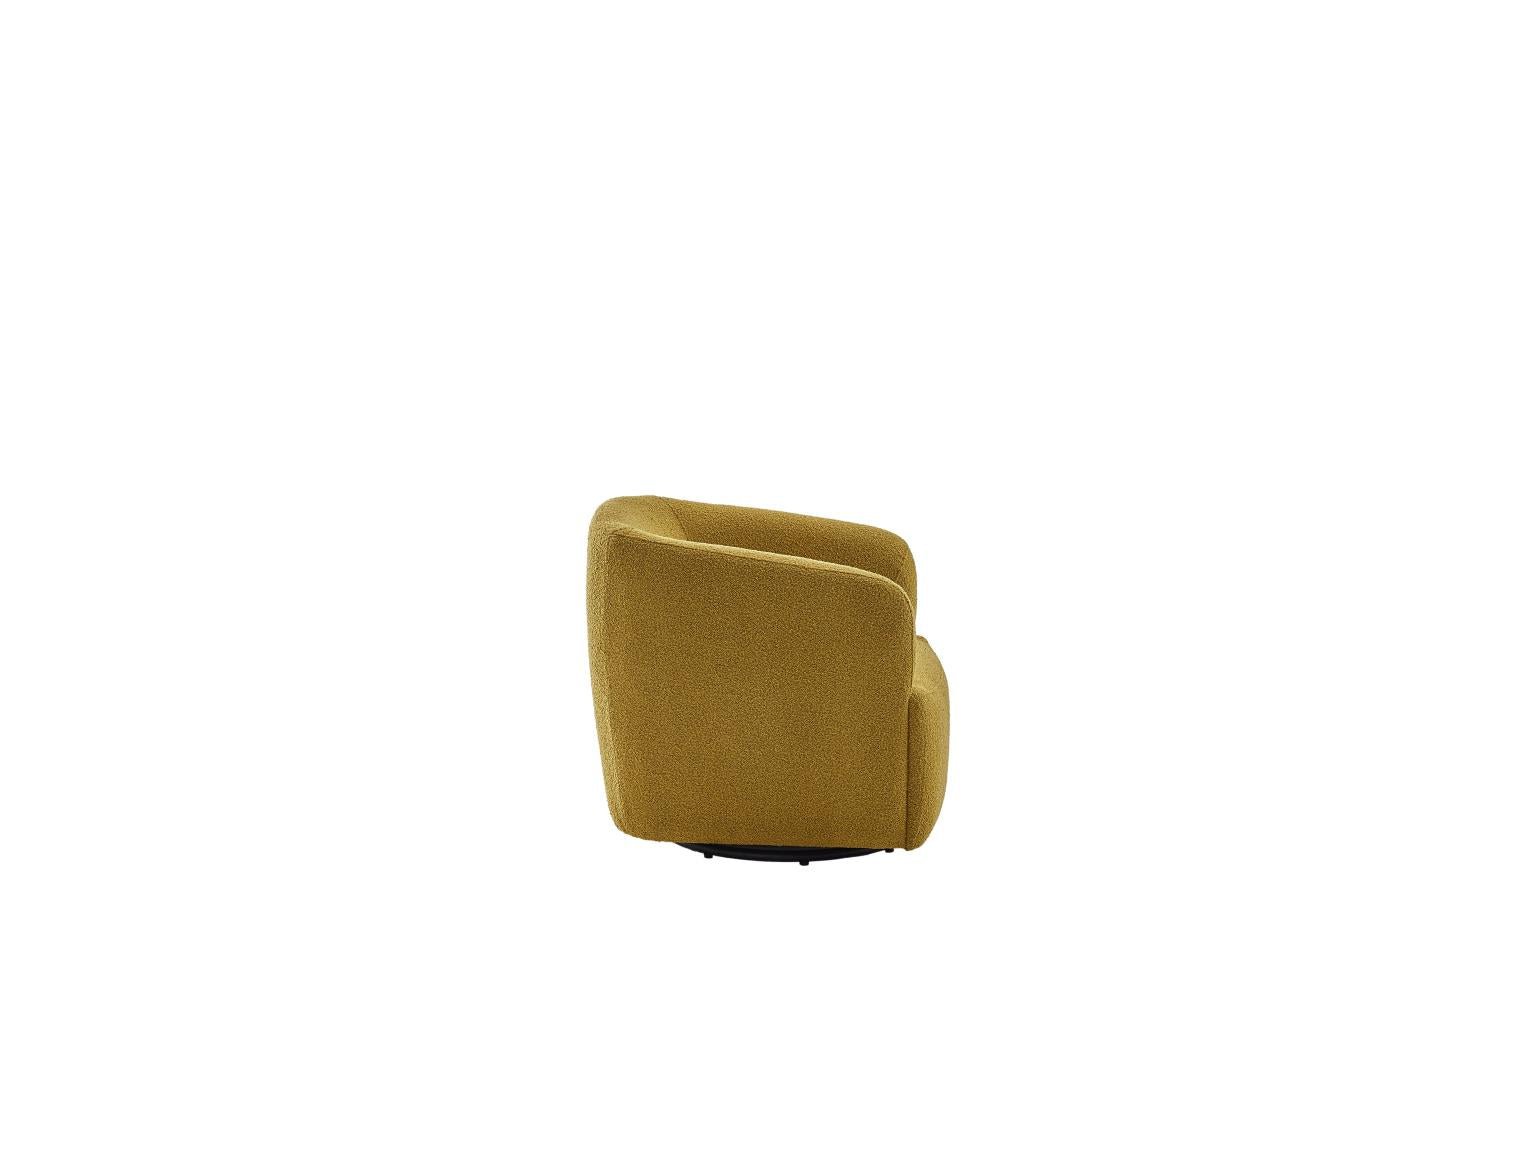 Picasso Swivel Chair (Oscar Mustard) by Bellona